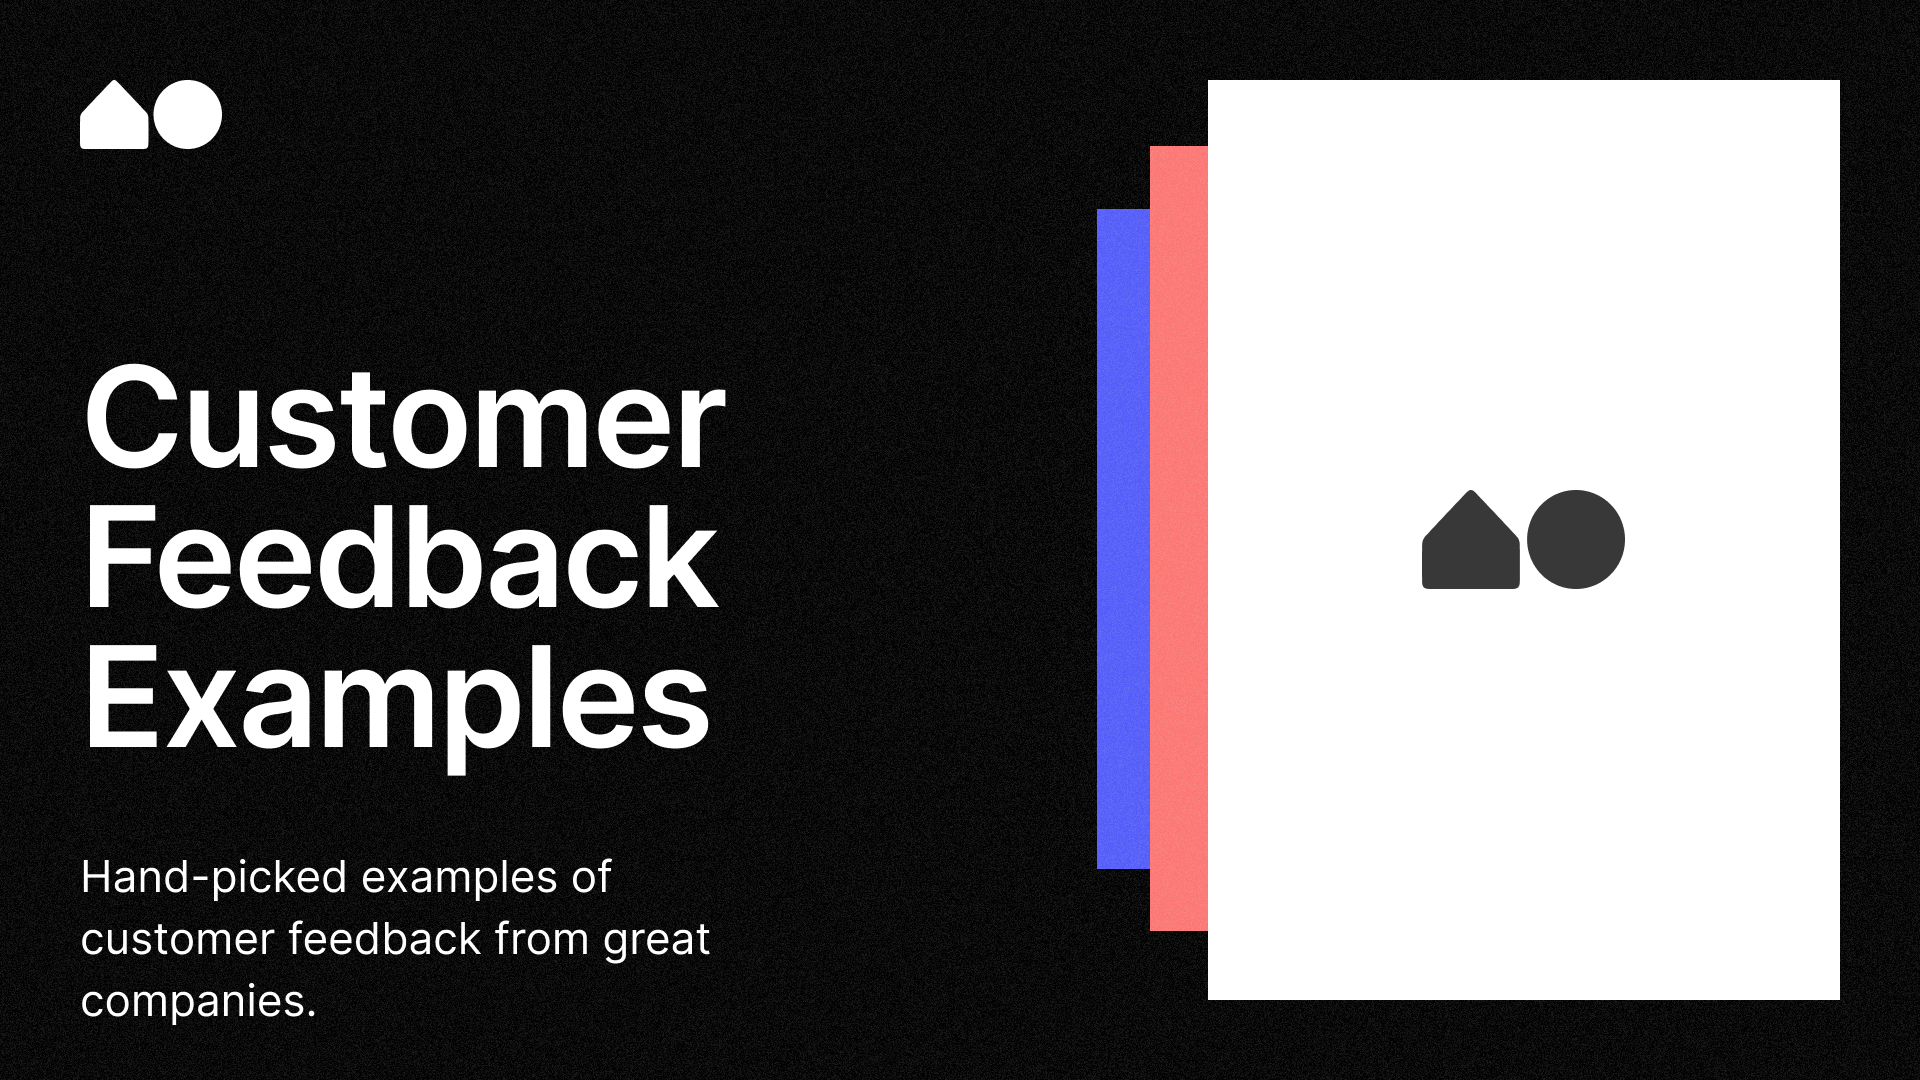 15 Customer Feedback Examples companies are using today